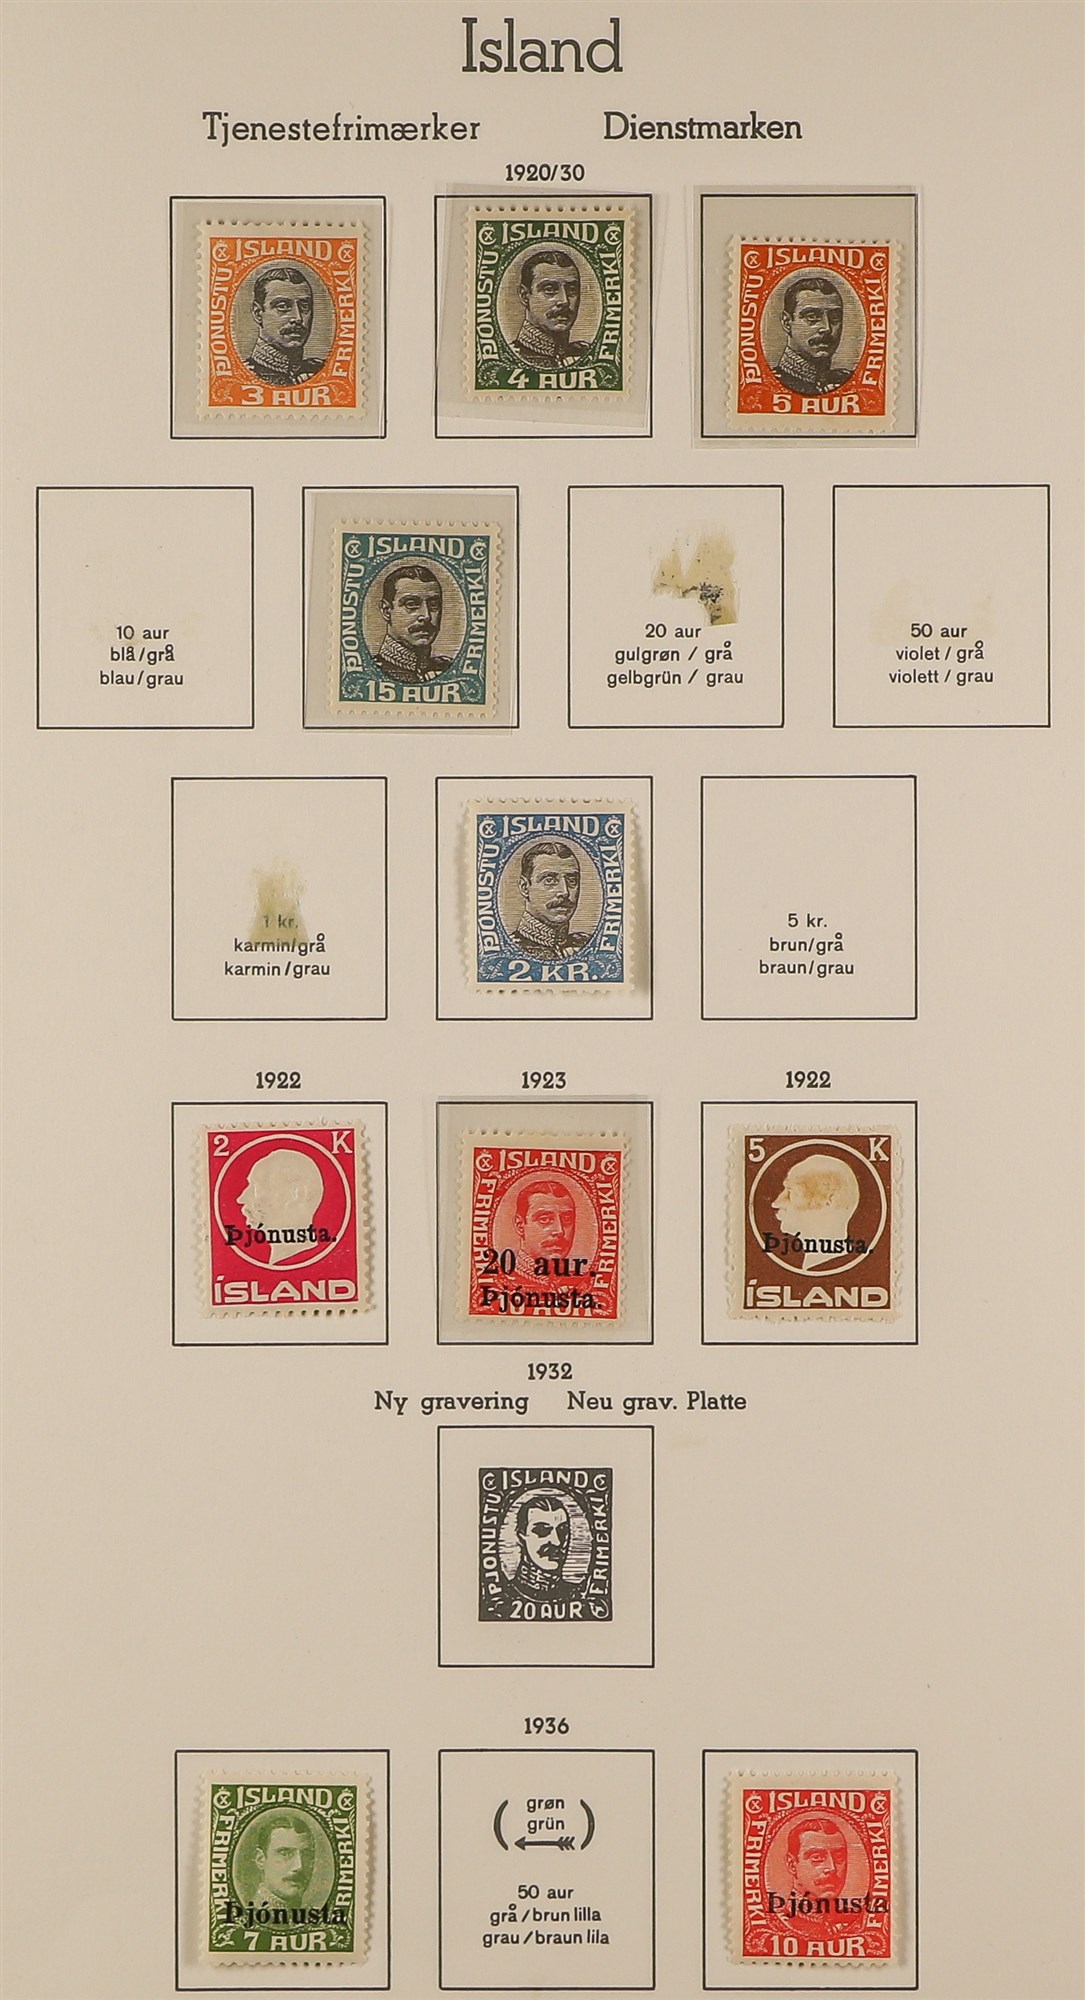 ICELAND OFFICIAL STAMPS 1873 - 1936 collection of 38 mint stamps on album pages. - Image 4 of 4